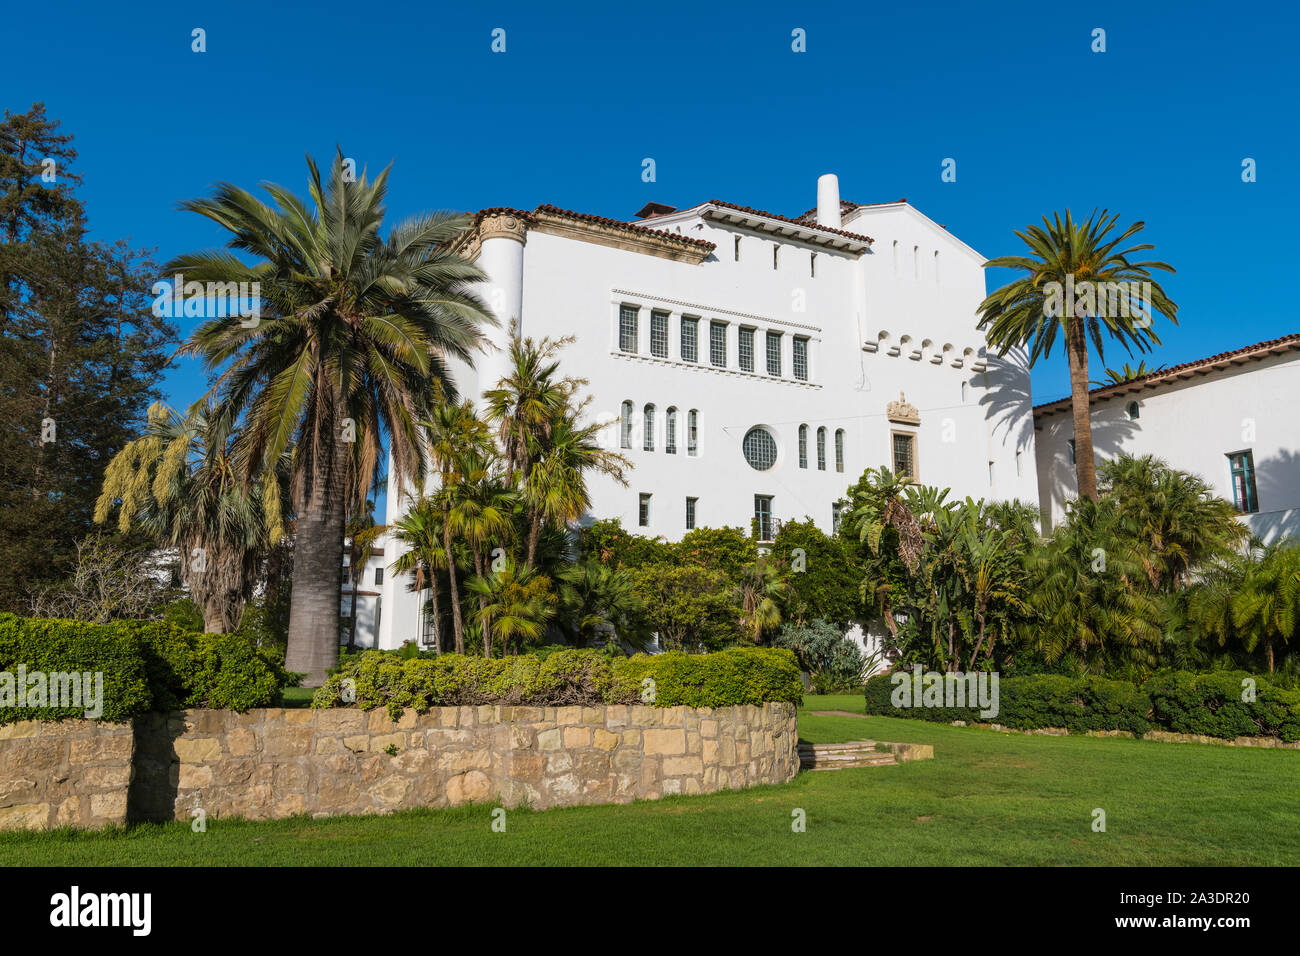 A beautiful white building in the Spanish architectural style in lush tropical gardens in the Santa Barbara County Courthouse complex - Santa Barbara, Stock Photo